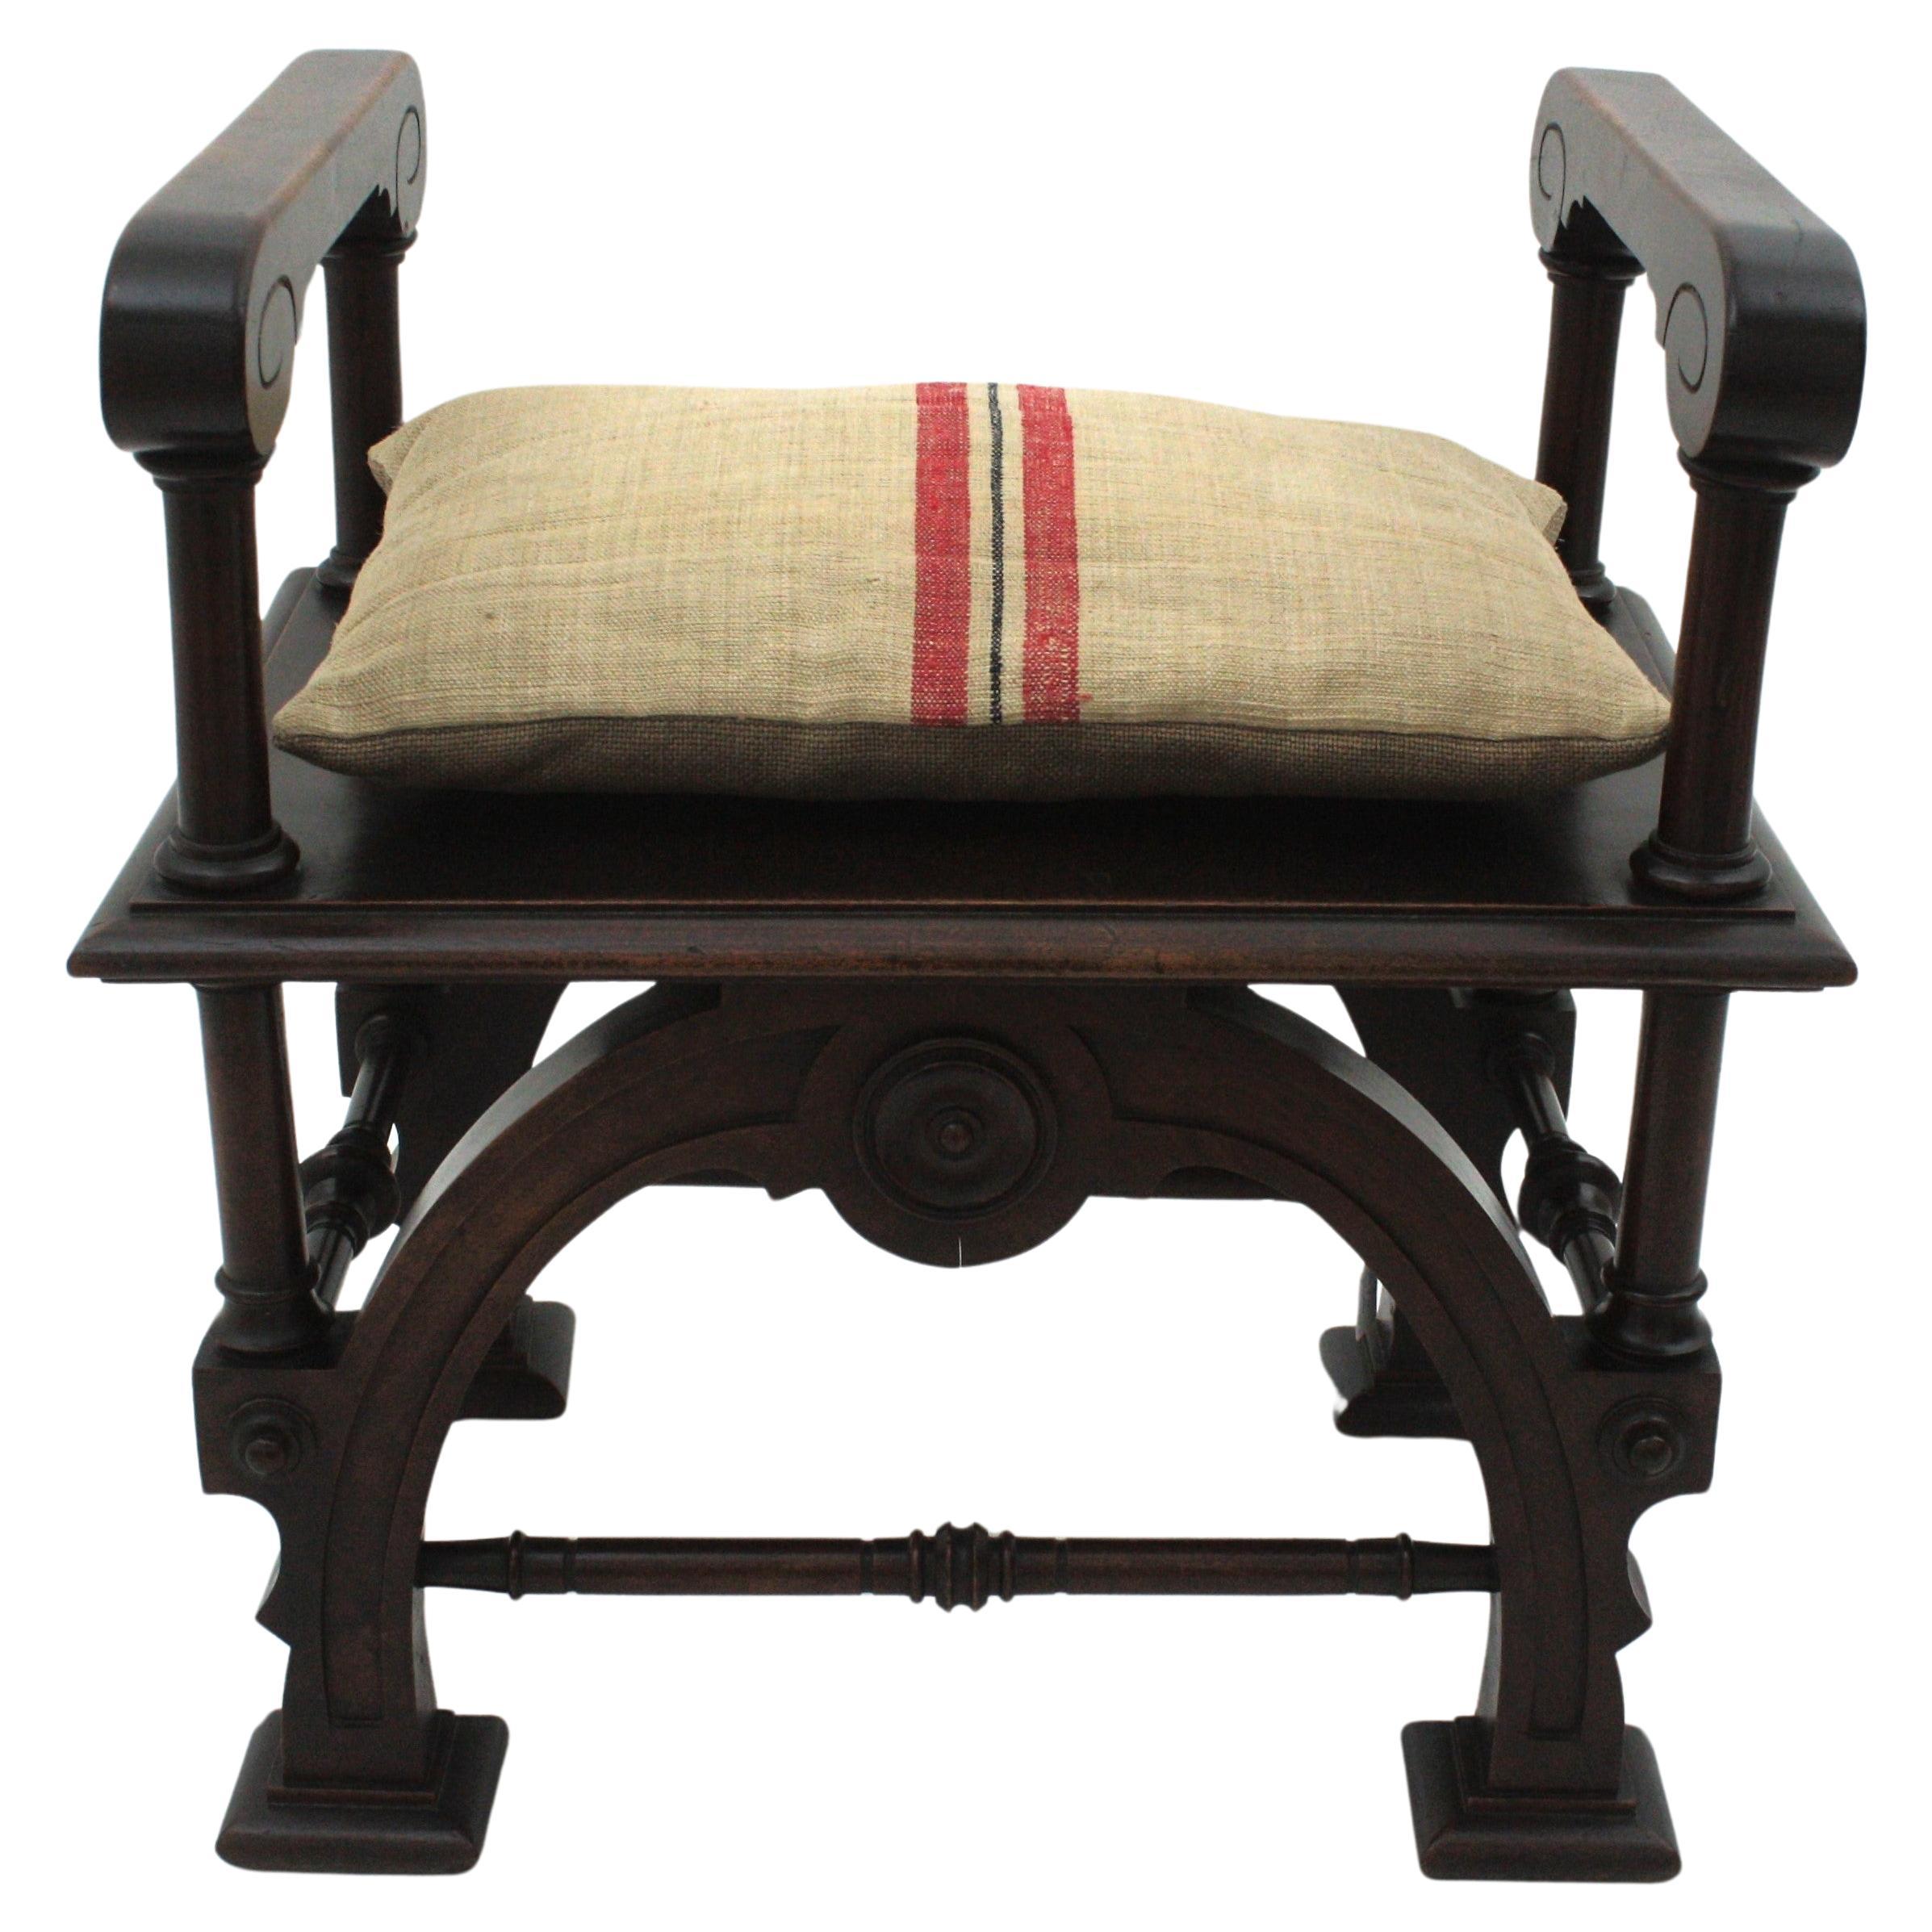 Renaissance Revival Spanish Revival Carved Stool or Bench in Walnut, 1940s For Sale